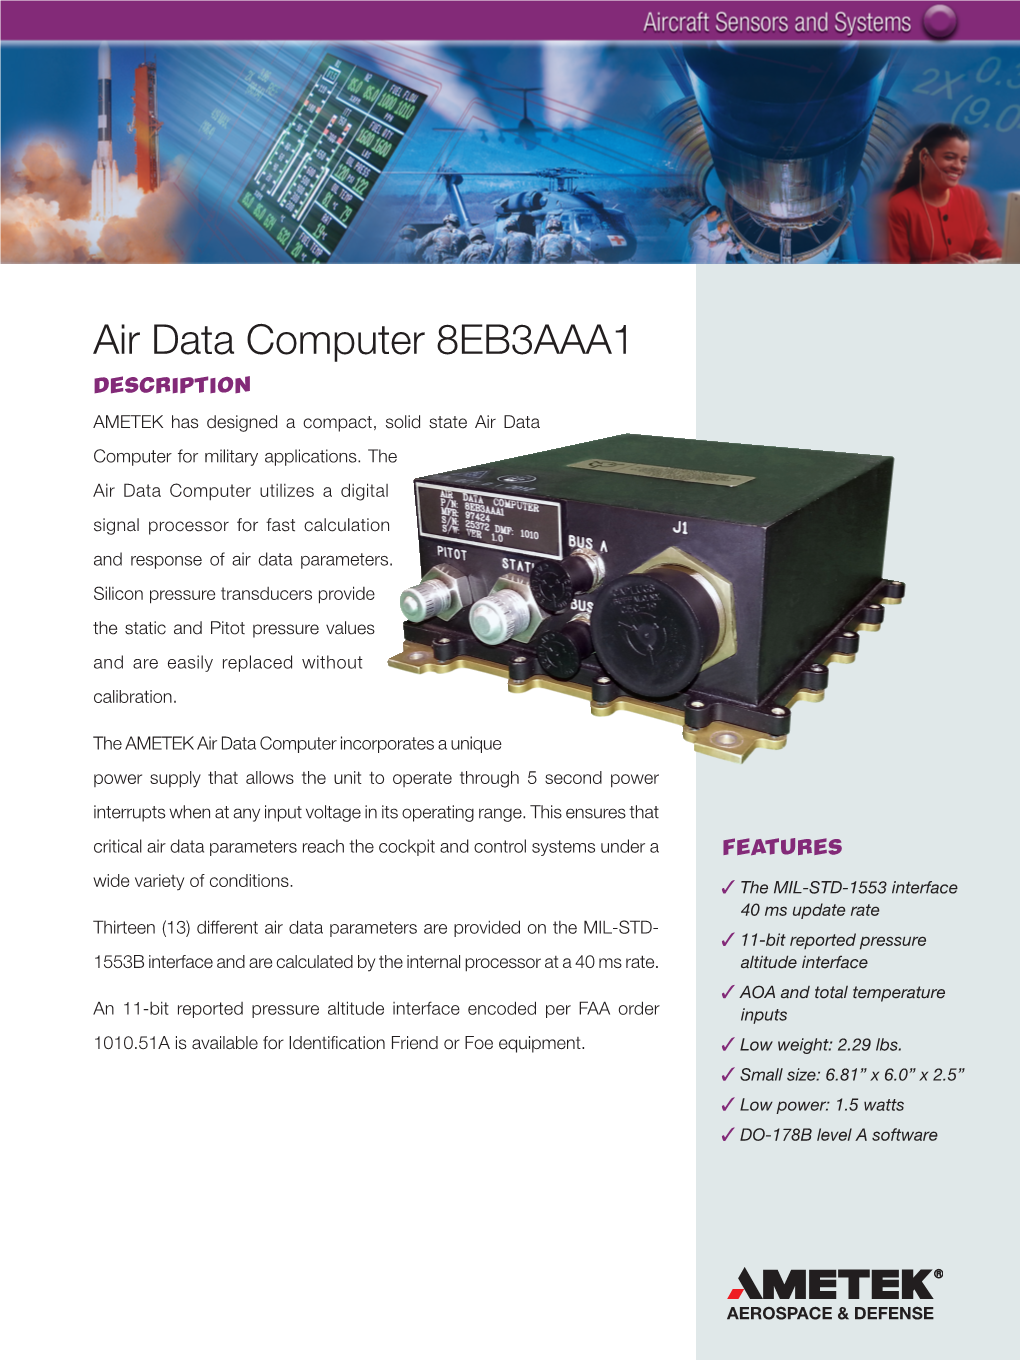 Air Data Computer 8EB3AAA1 DESCRIPTION AMETEK Has Designed a Compact, Solid State Air Data Computer for Military Applications